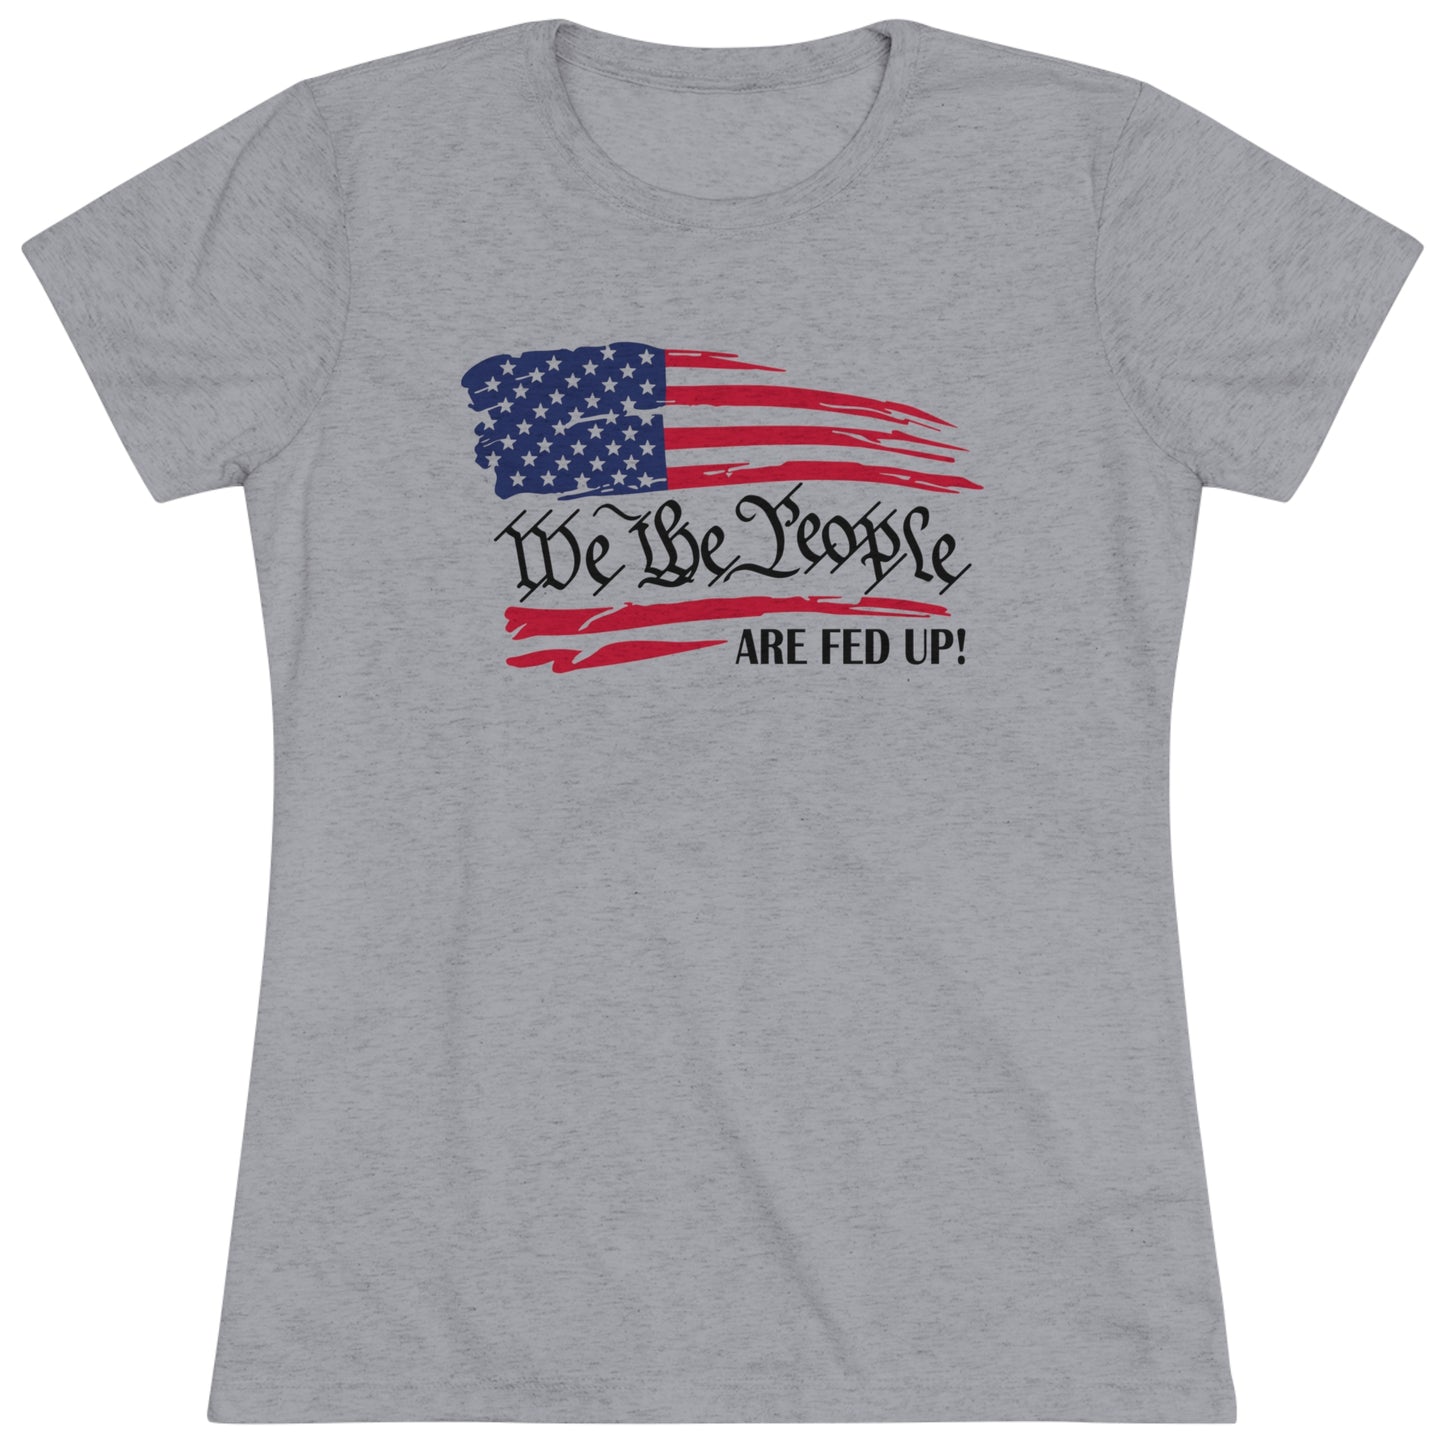 WE THE PEOPLE ARE FED UP! - WOMEN'S TEE